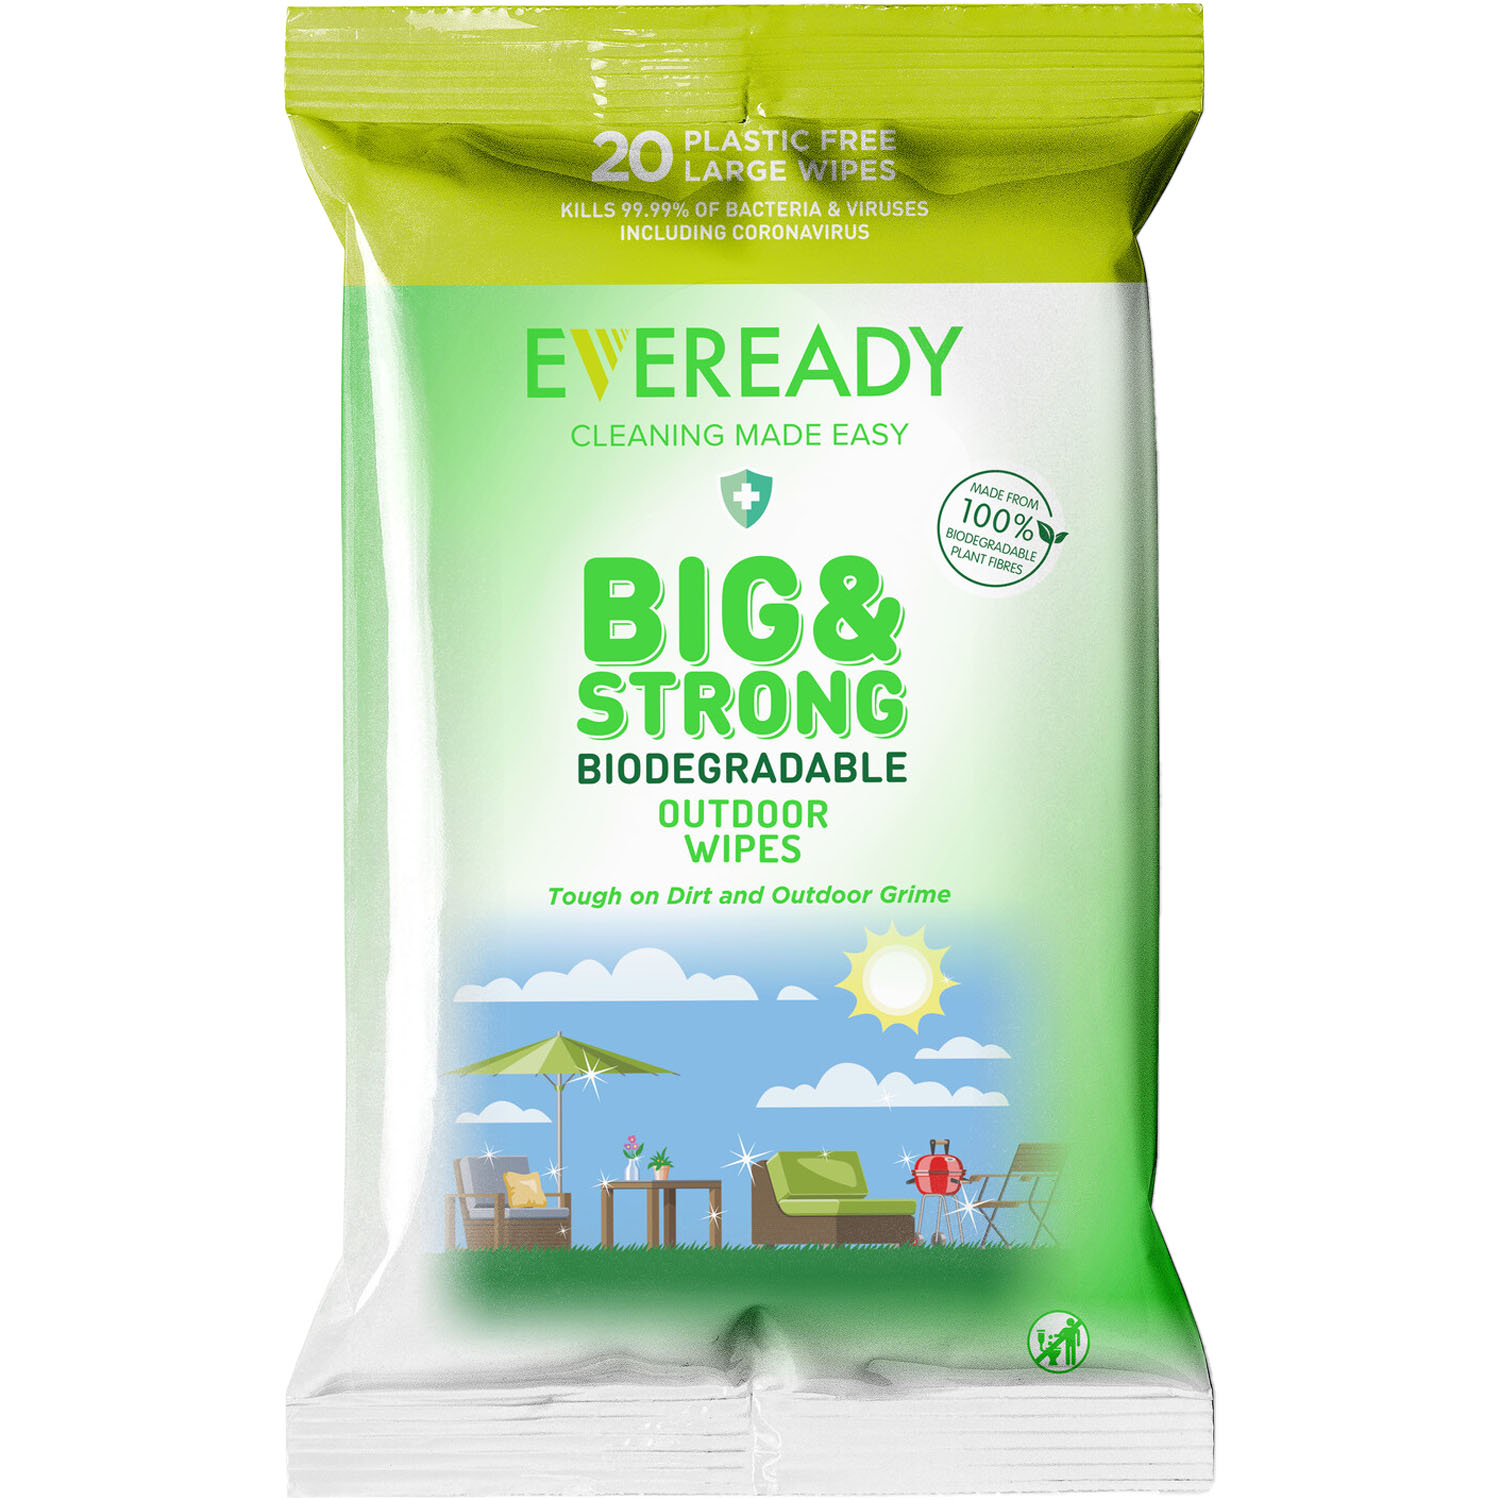 Eveready Big & Strong Biodegradable Outdoor Antibacterial Wipe 20 Pack Image